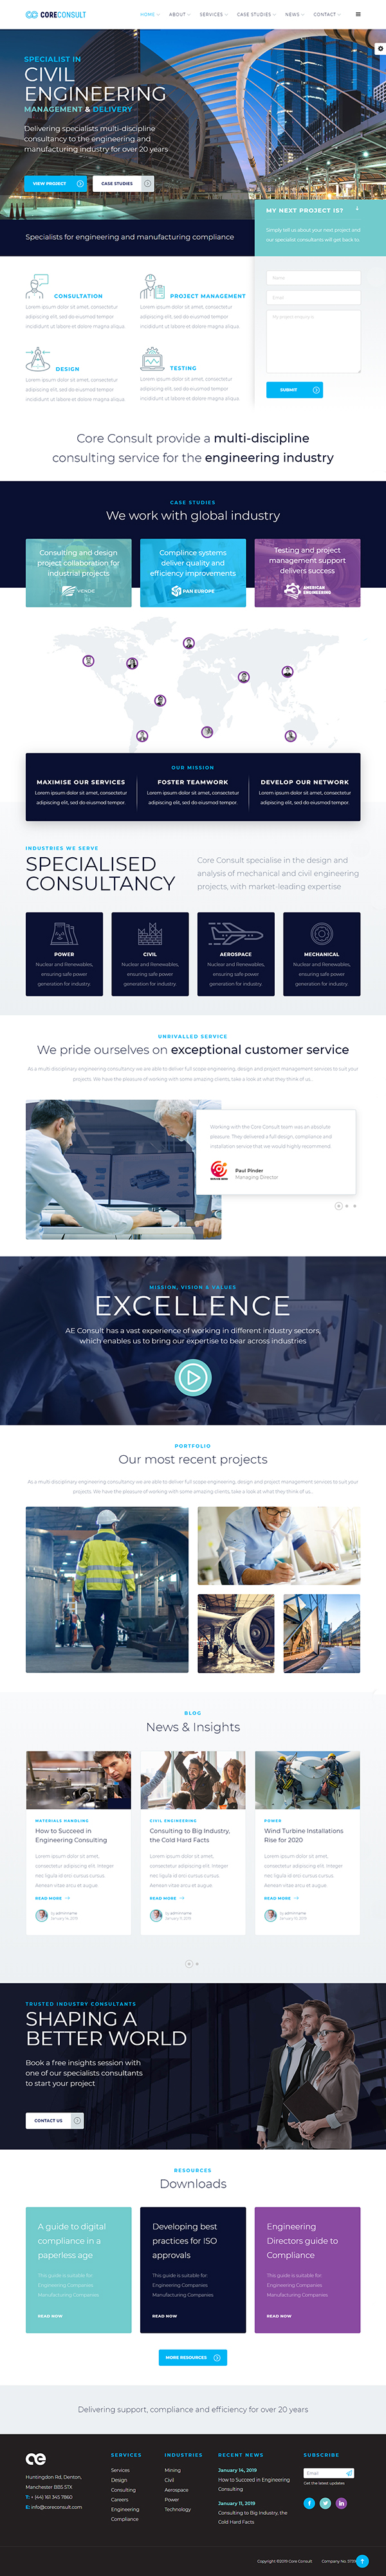 Coreconsult - Big Industry & Business Consulting WordPress Theme